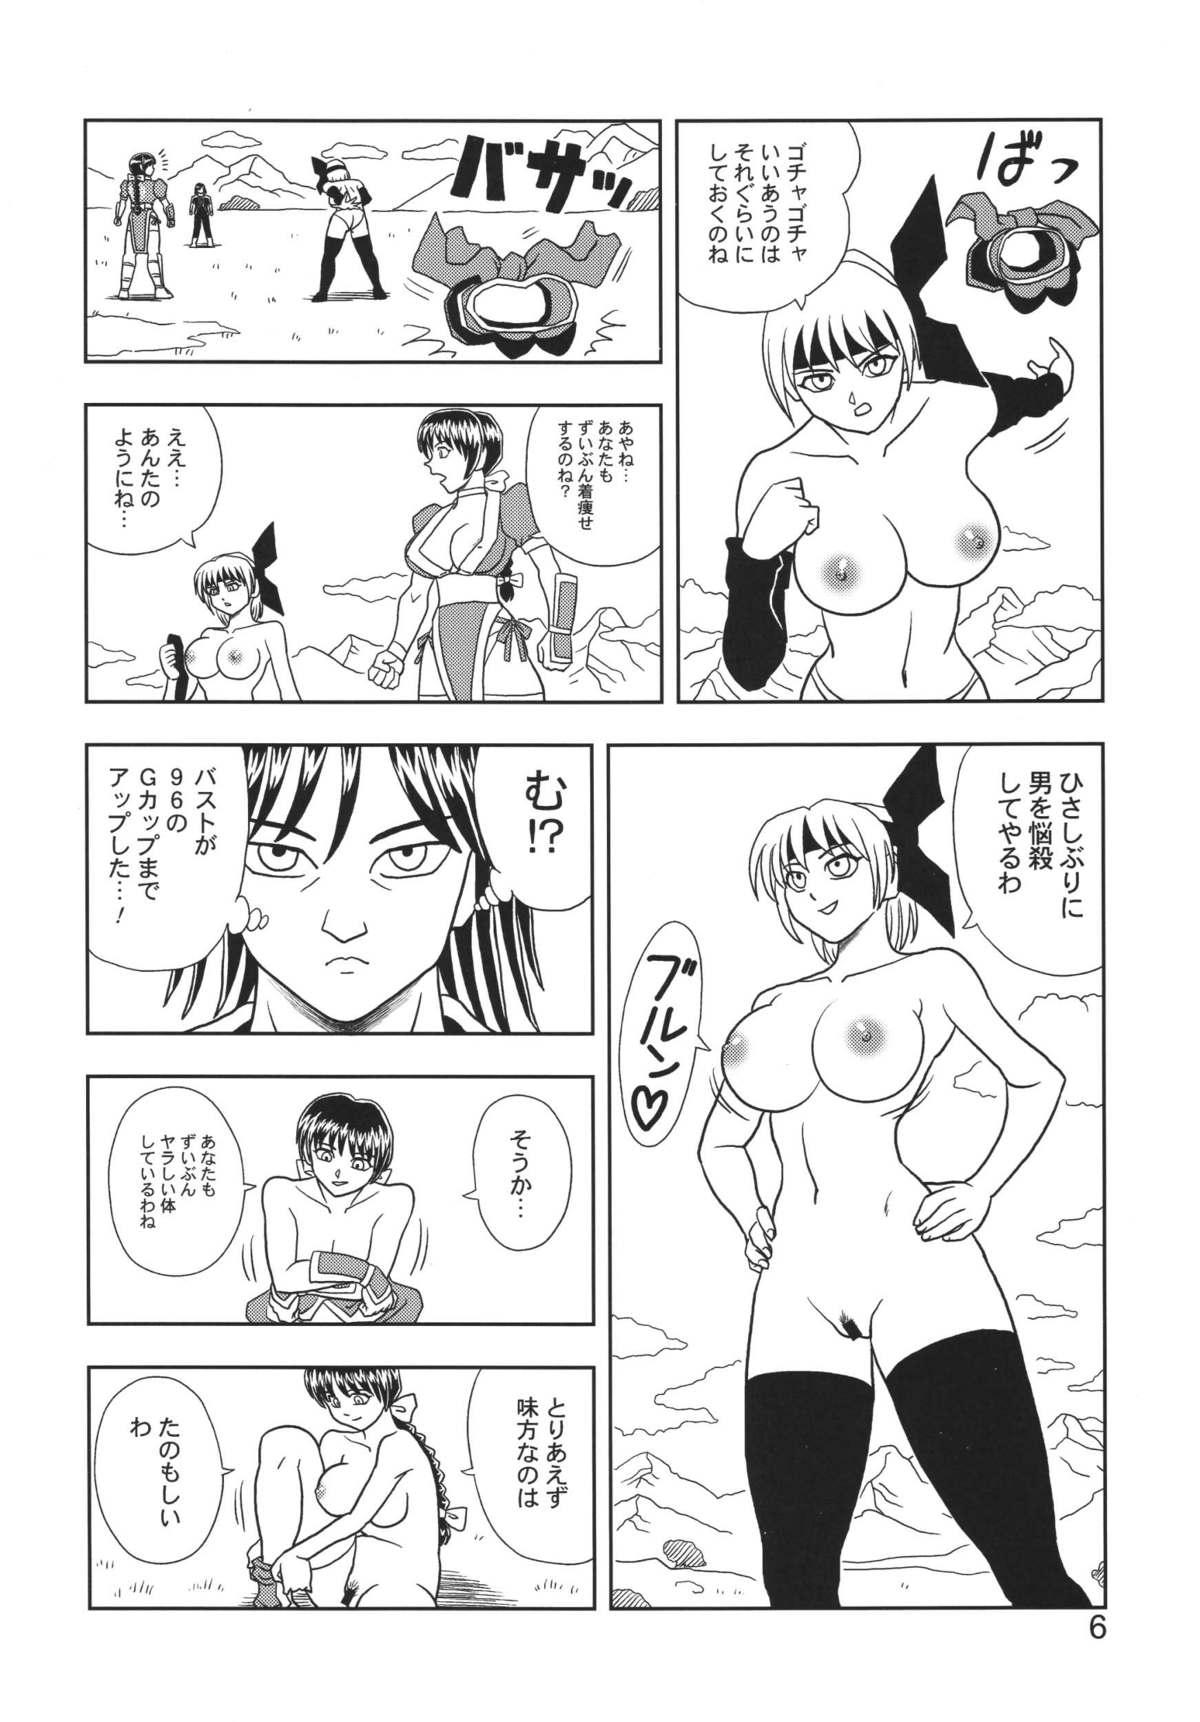 Orgy Kasumi or Ayane - Dead or alive Vadia - Page 6